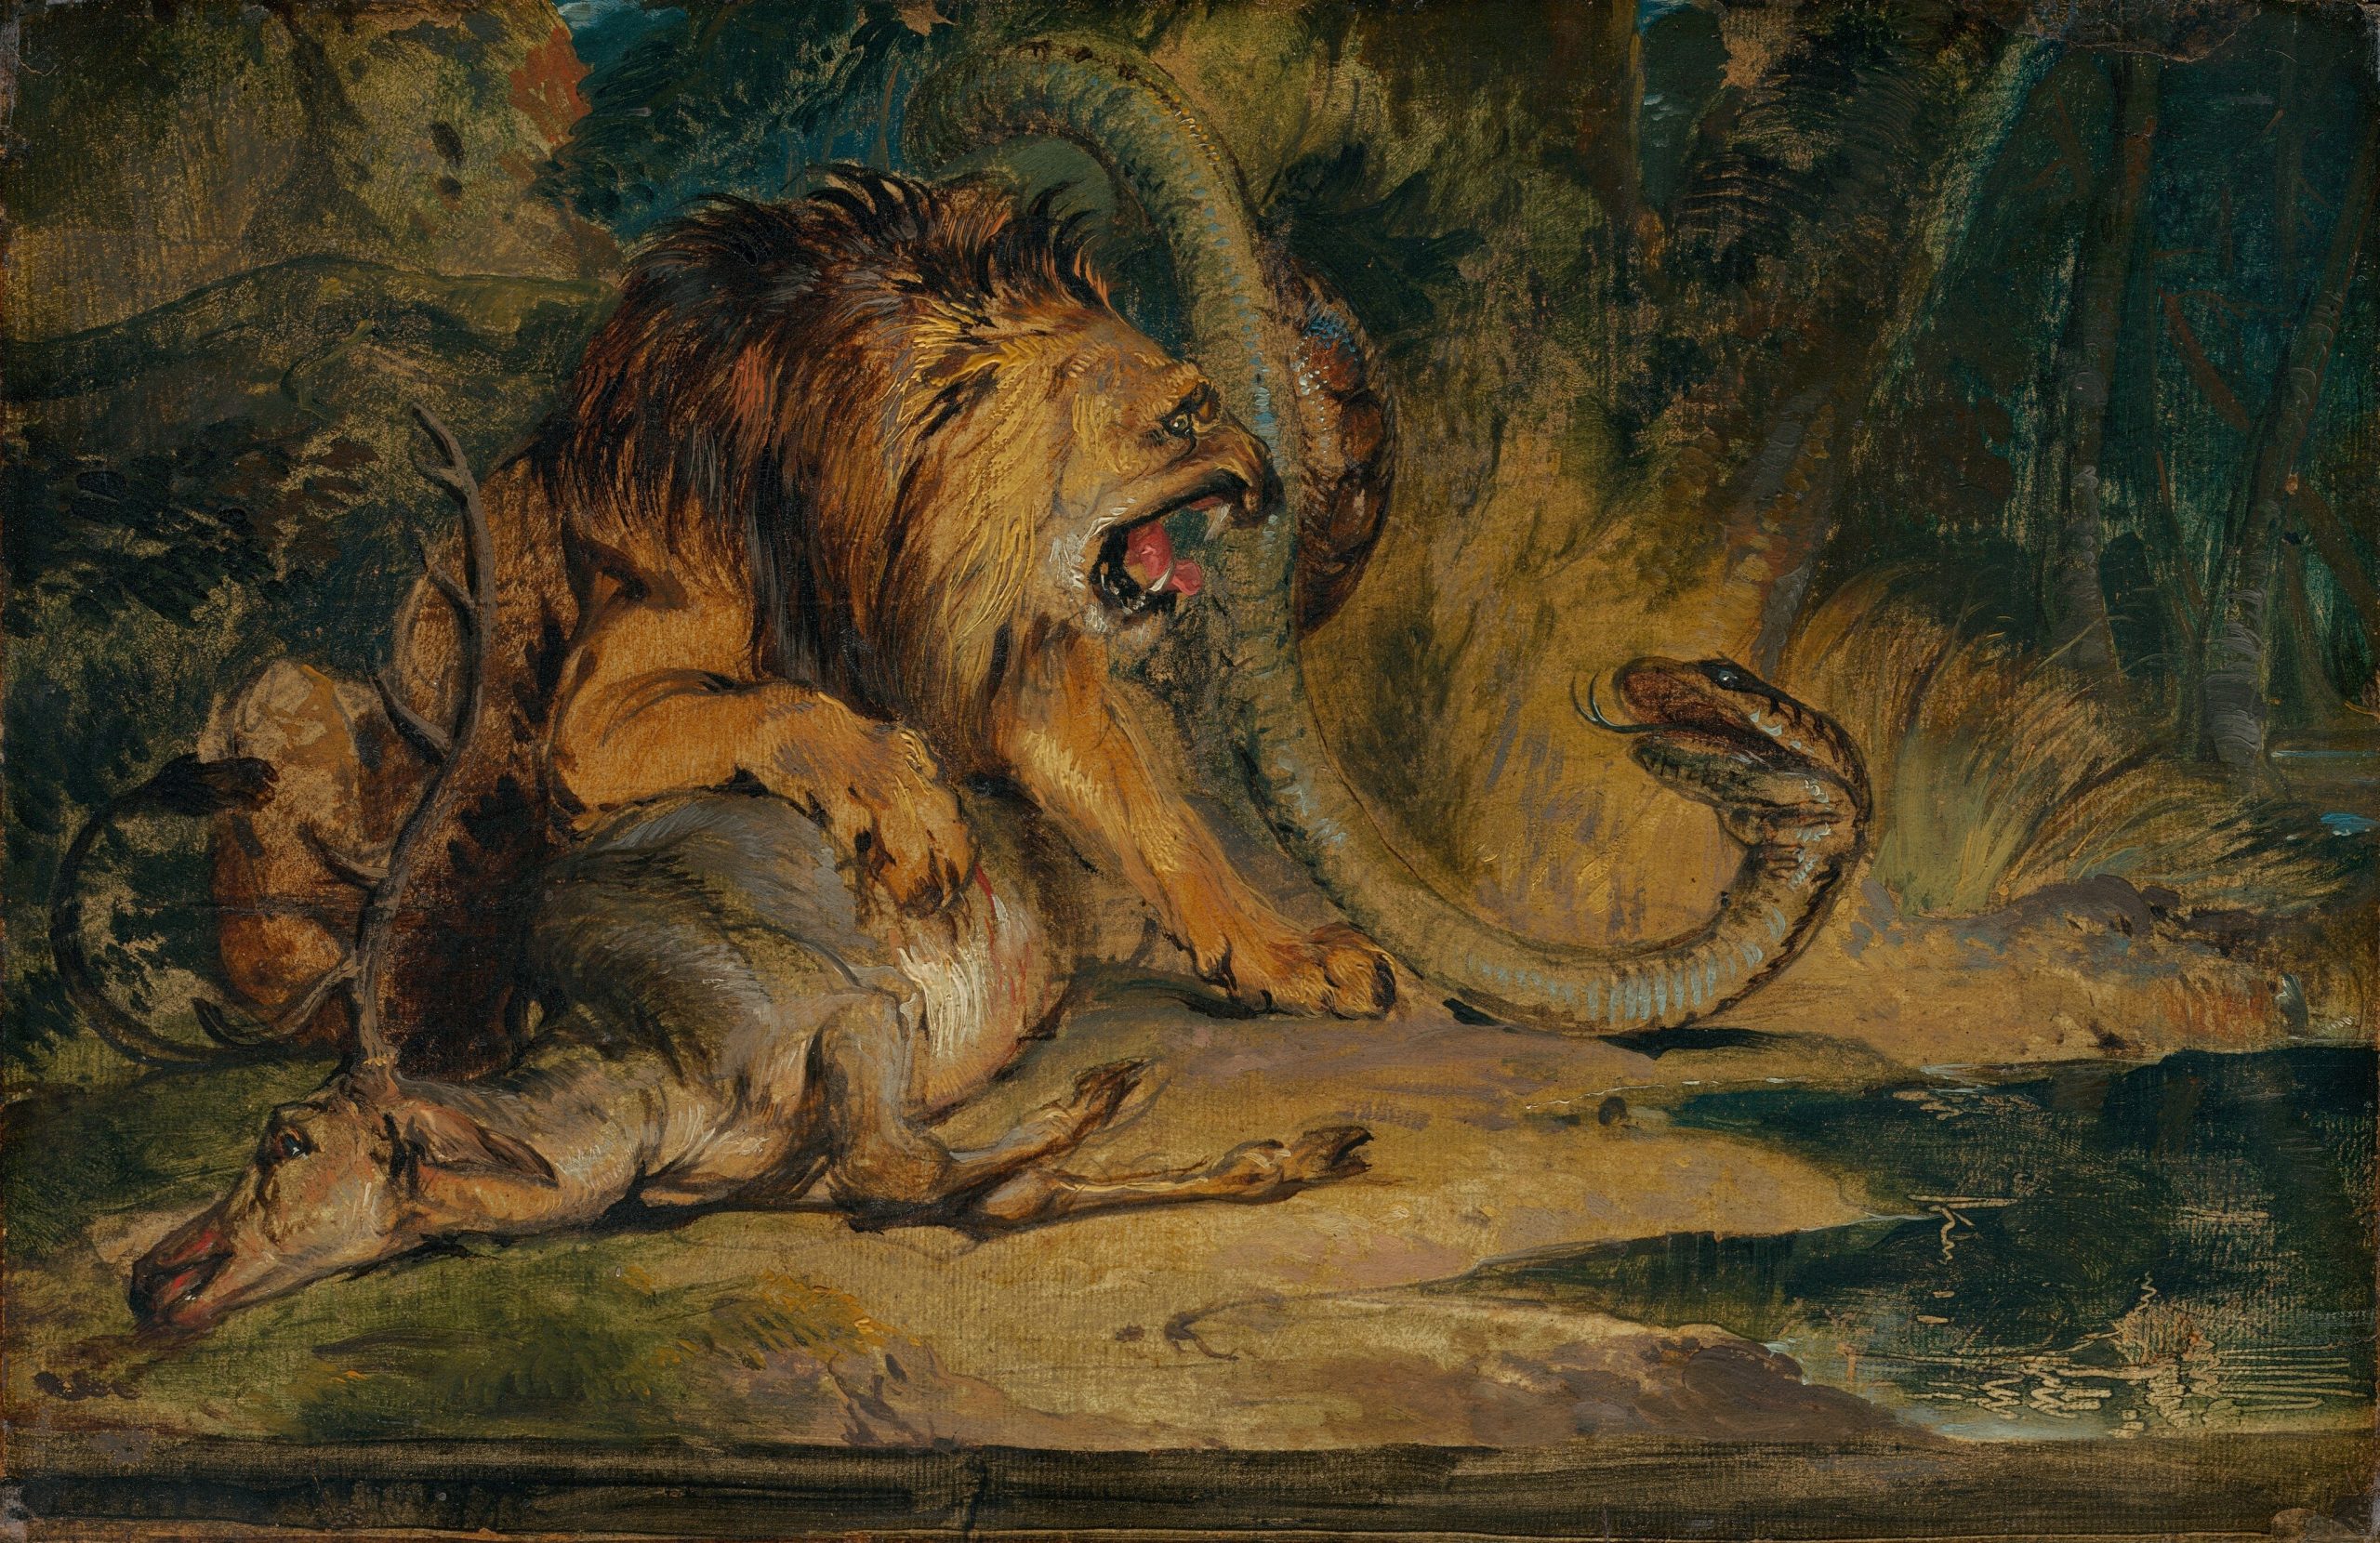 A lion viciously attacks a snake in the night under a shadowed sky.